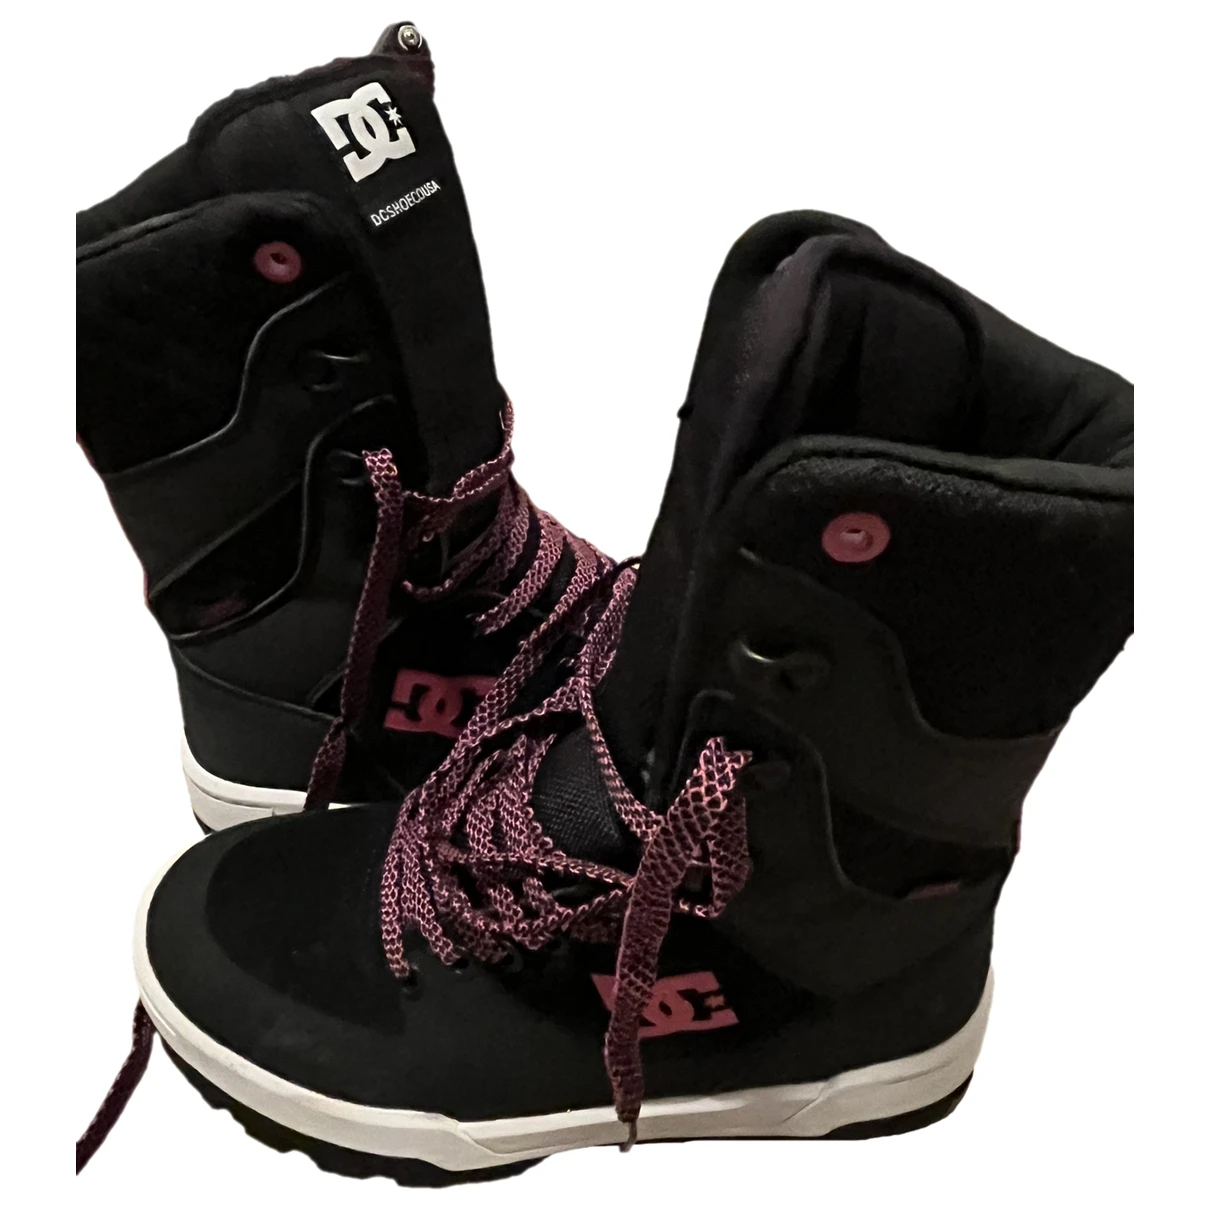 shoes DC Shoes boots for Female Leather 37 EU. Used condition